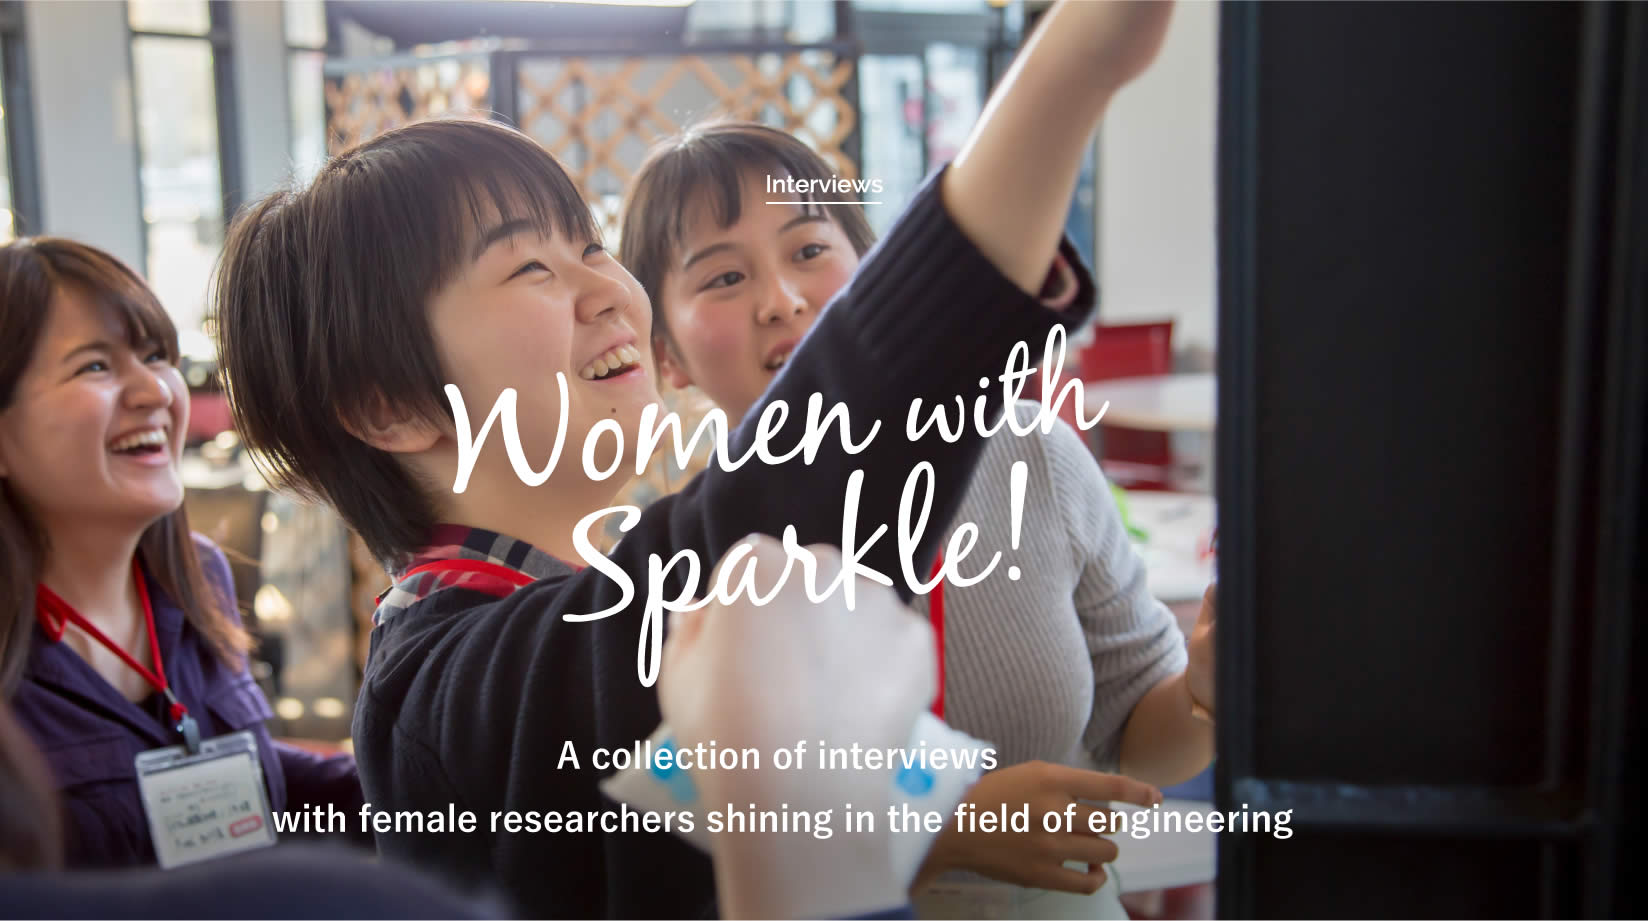 ⑦	A collection of interviews with female researchers shining in the field of engineering｜Women with Sparkle